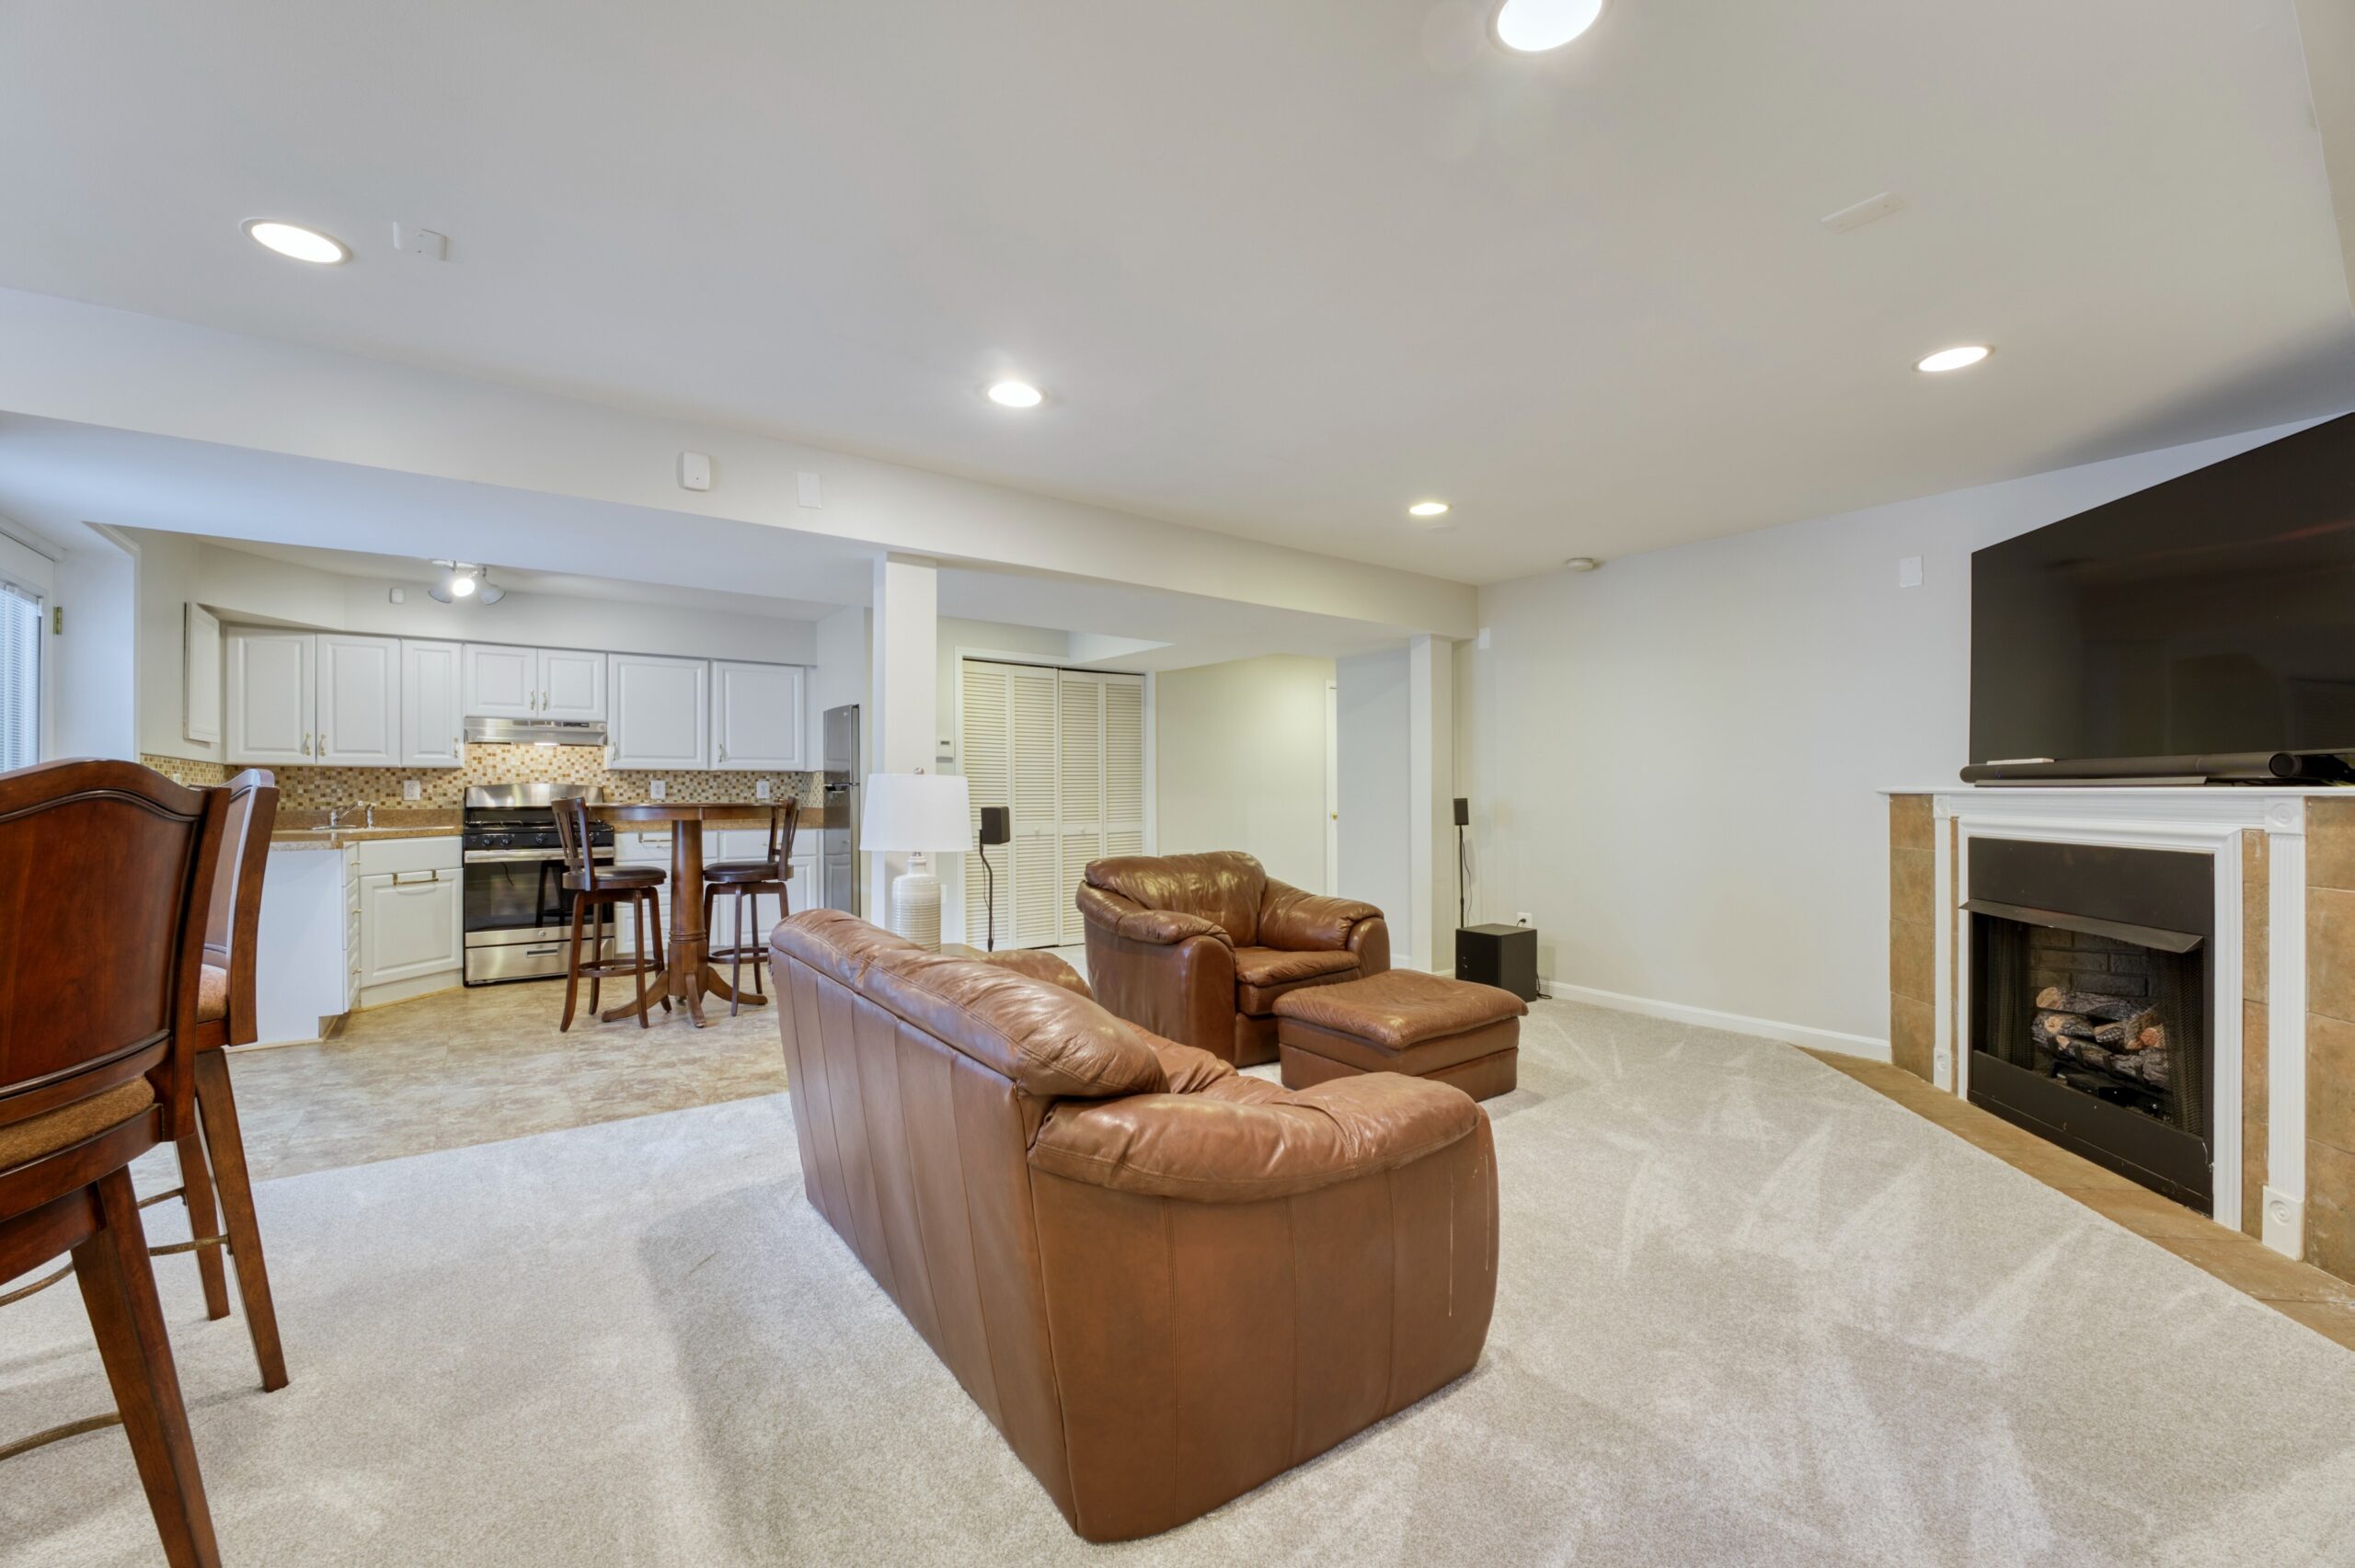 Professional interior photo of 13700 Holly Forest Dr - showing the basement with a carpeted living room with fireplace in the foreground and a second kitchen in the background on tile floors. 